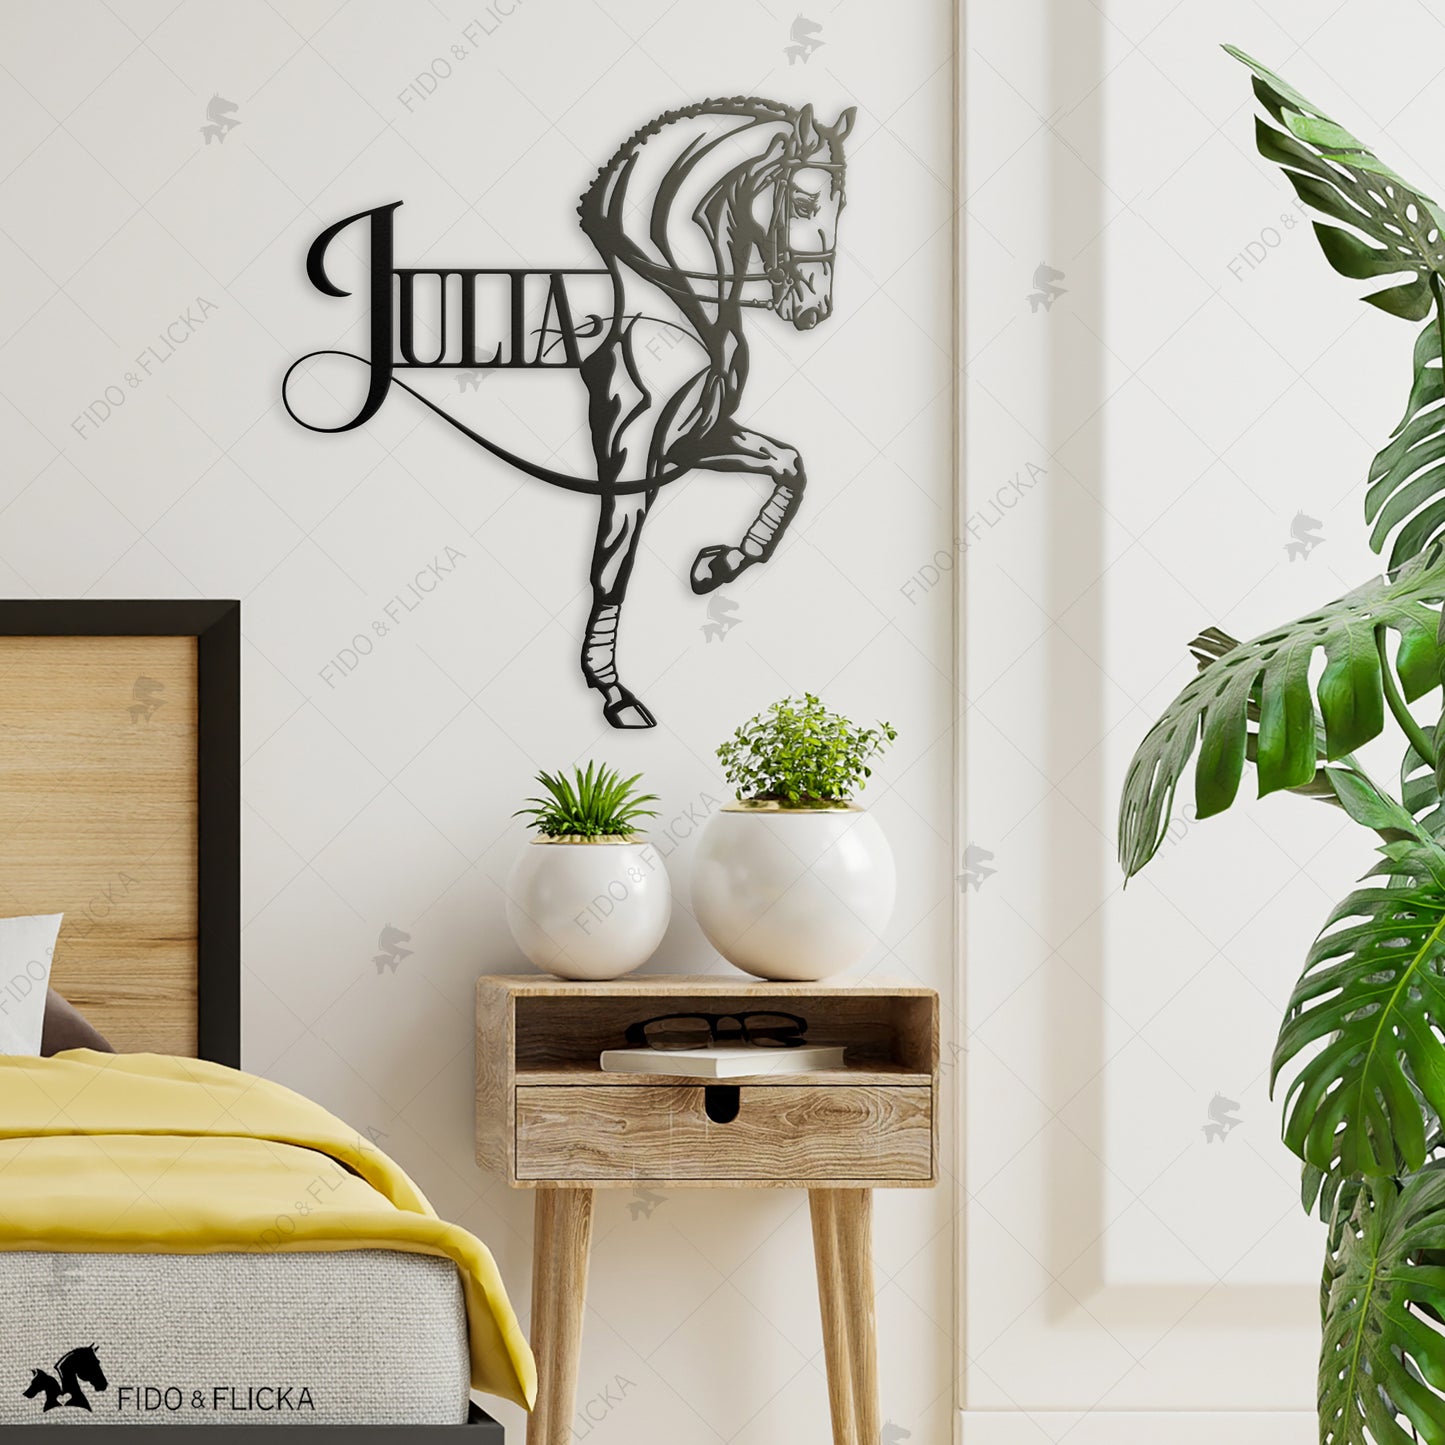 personalized sign for the dressage rider in bedroom